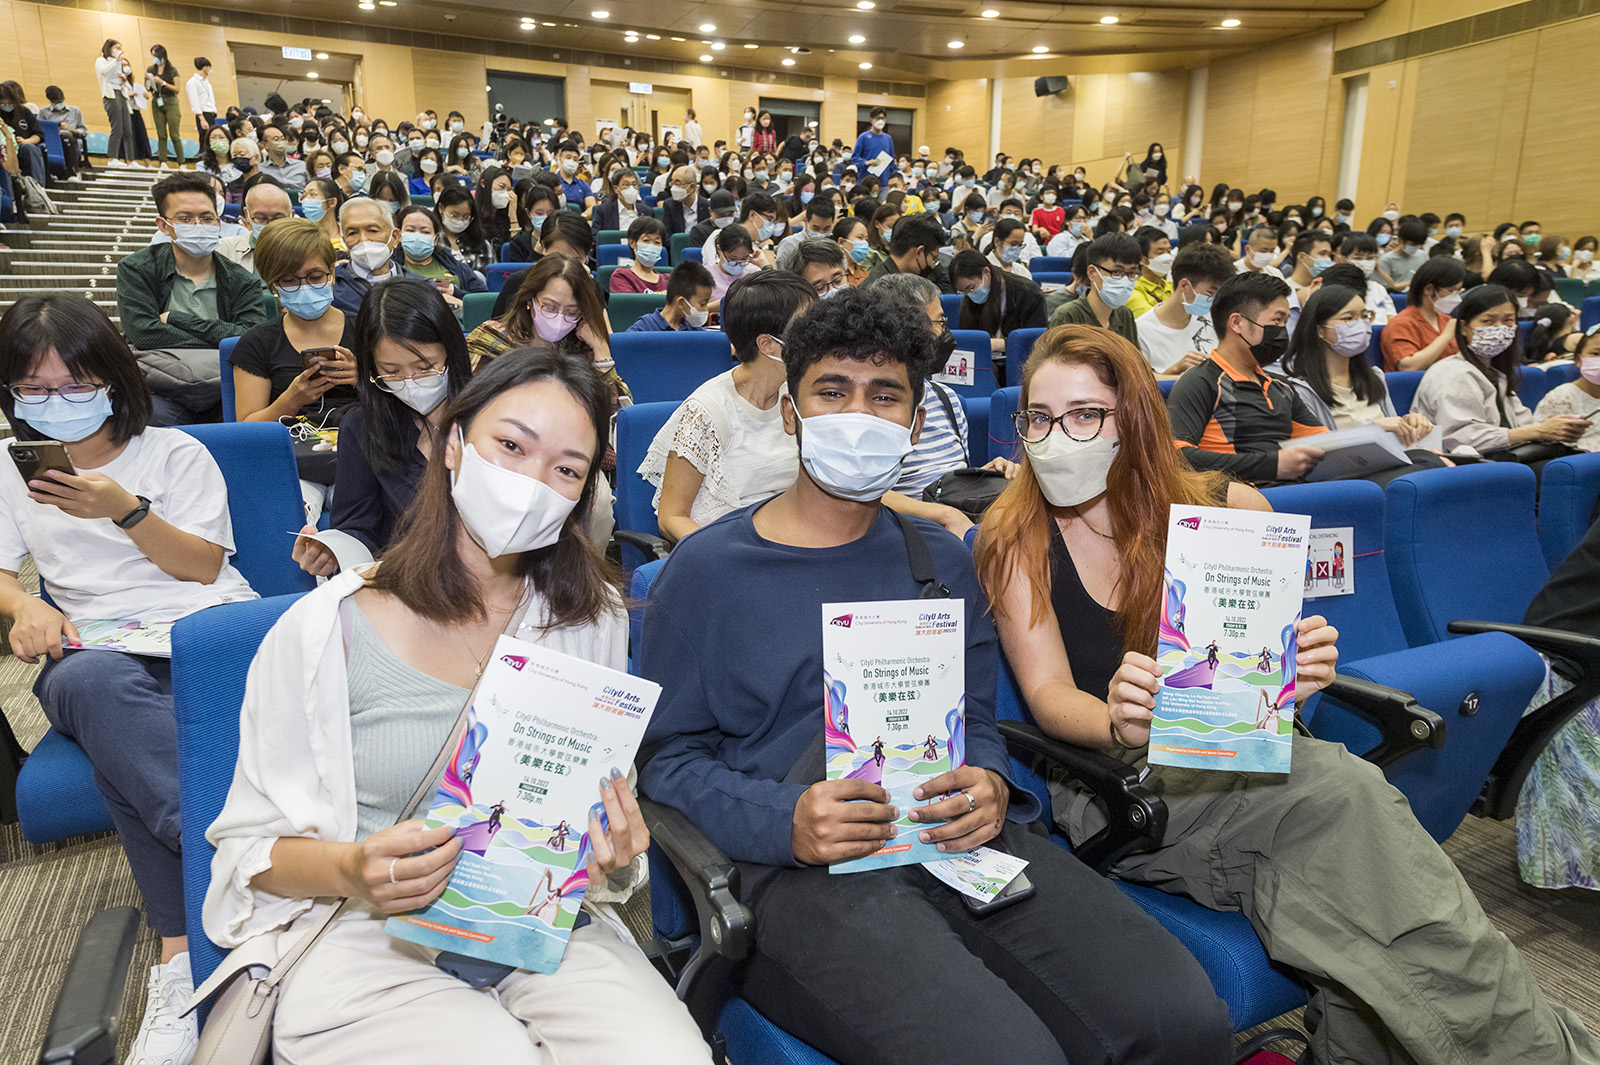 The opening concert drew an audience of 520 music lovers from CityU and the public. 